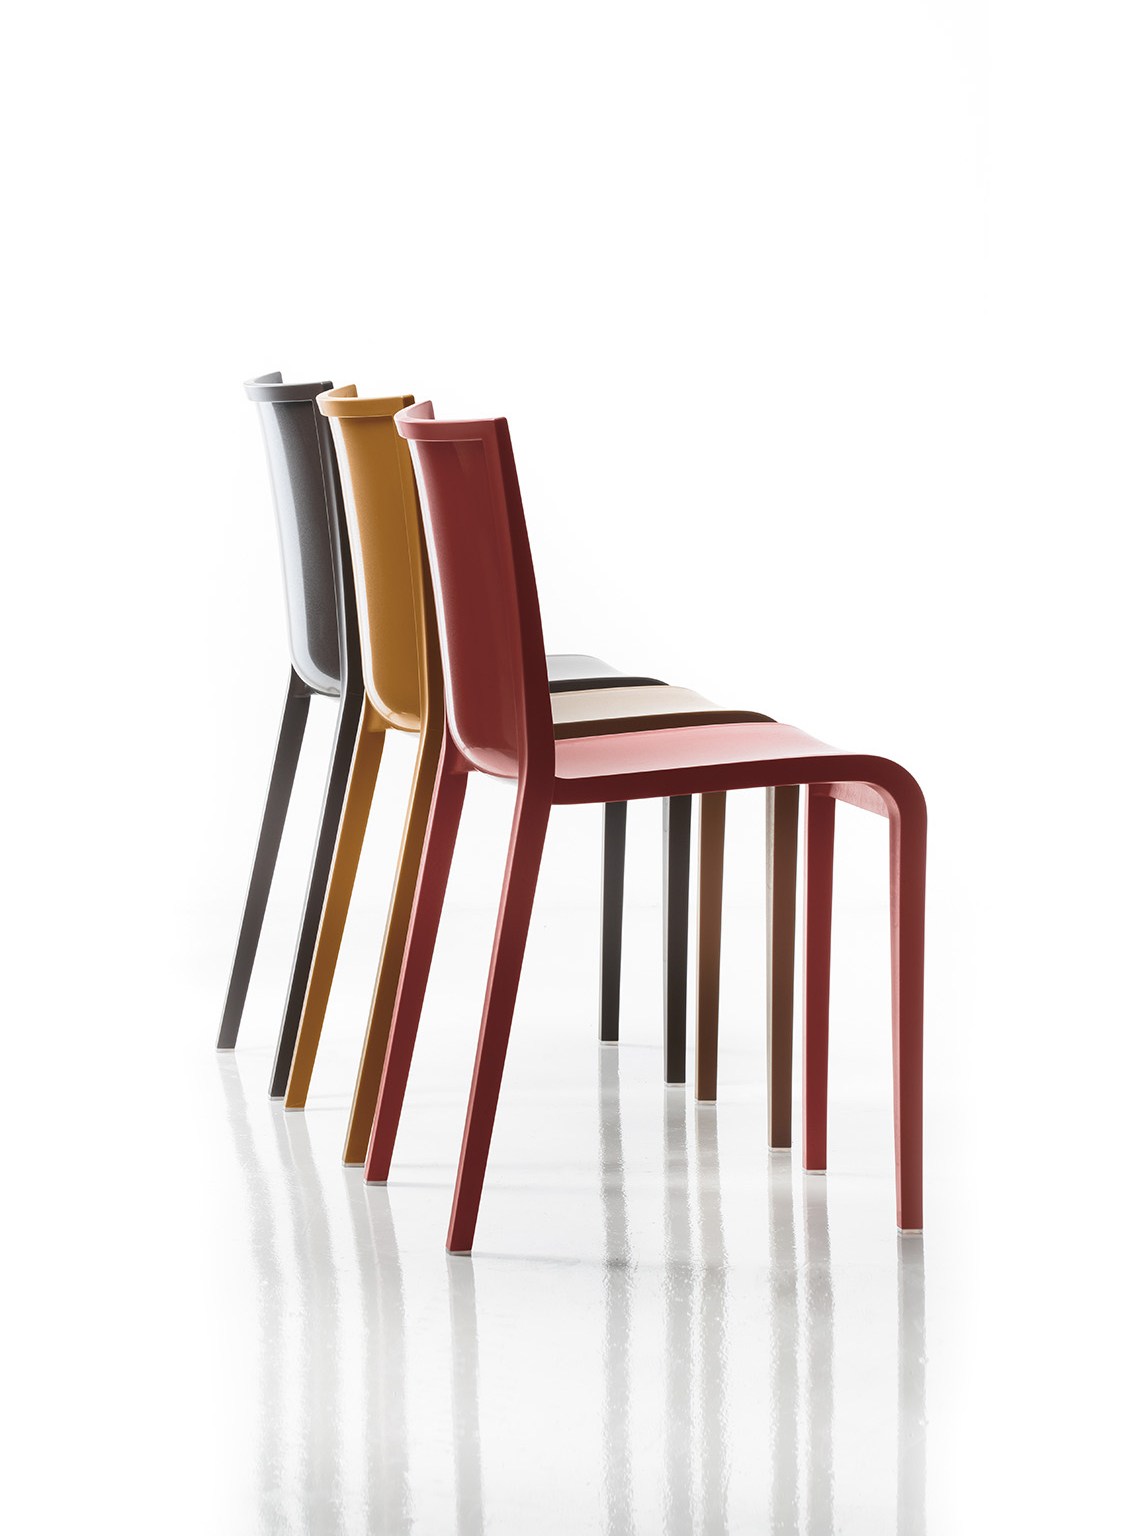 Nassau 533 Chairs by Marc Sadler for Metalmobil